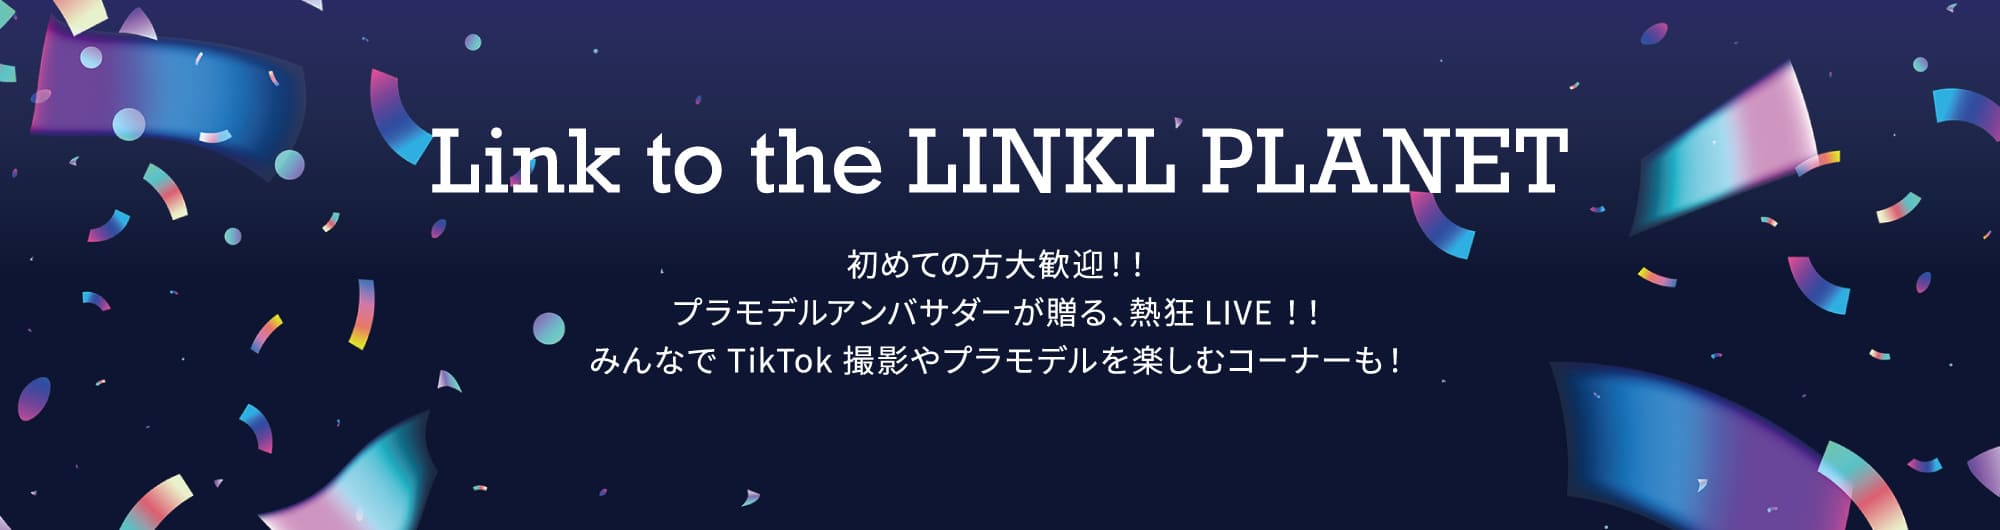 Link to the LINKL PLANET